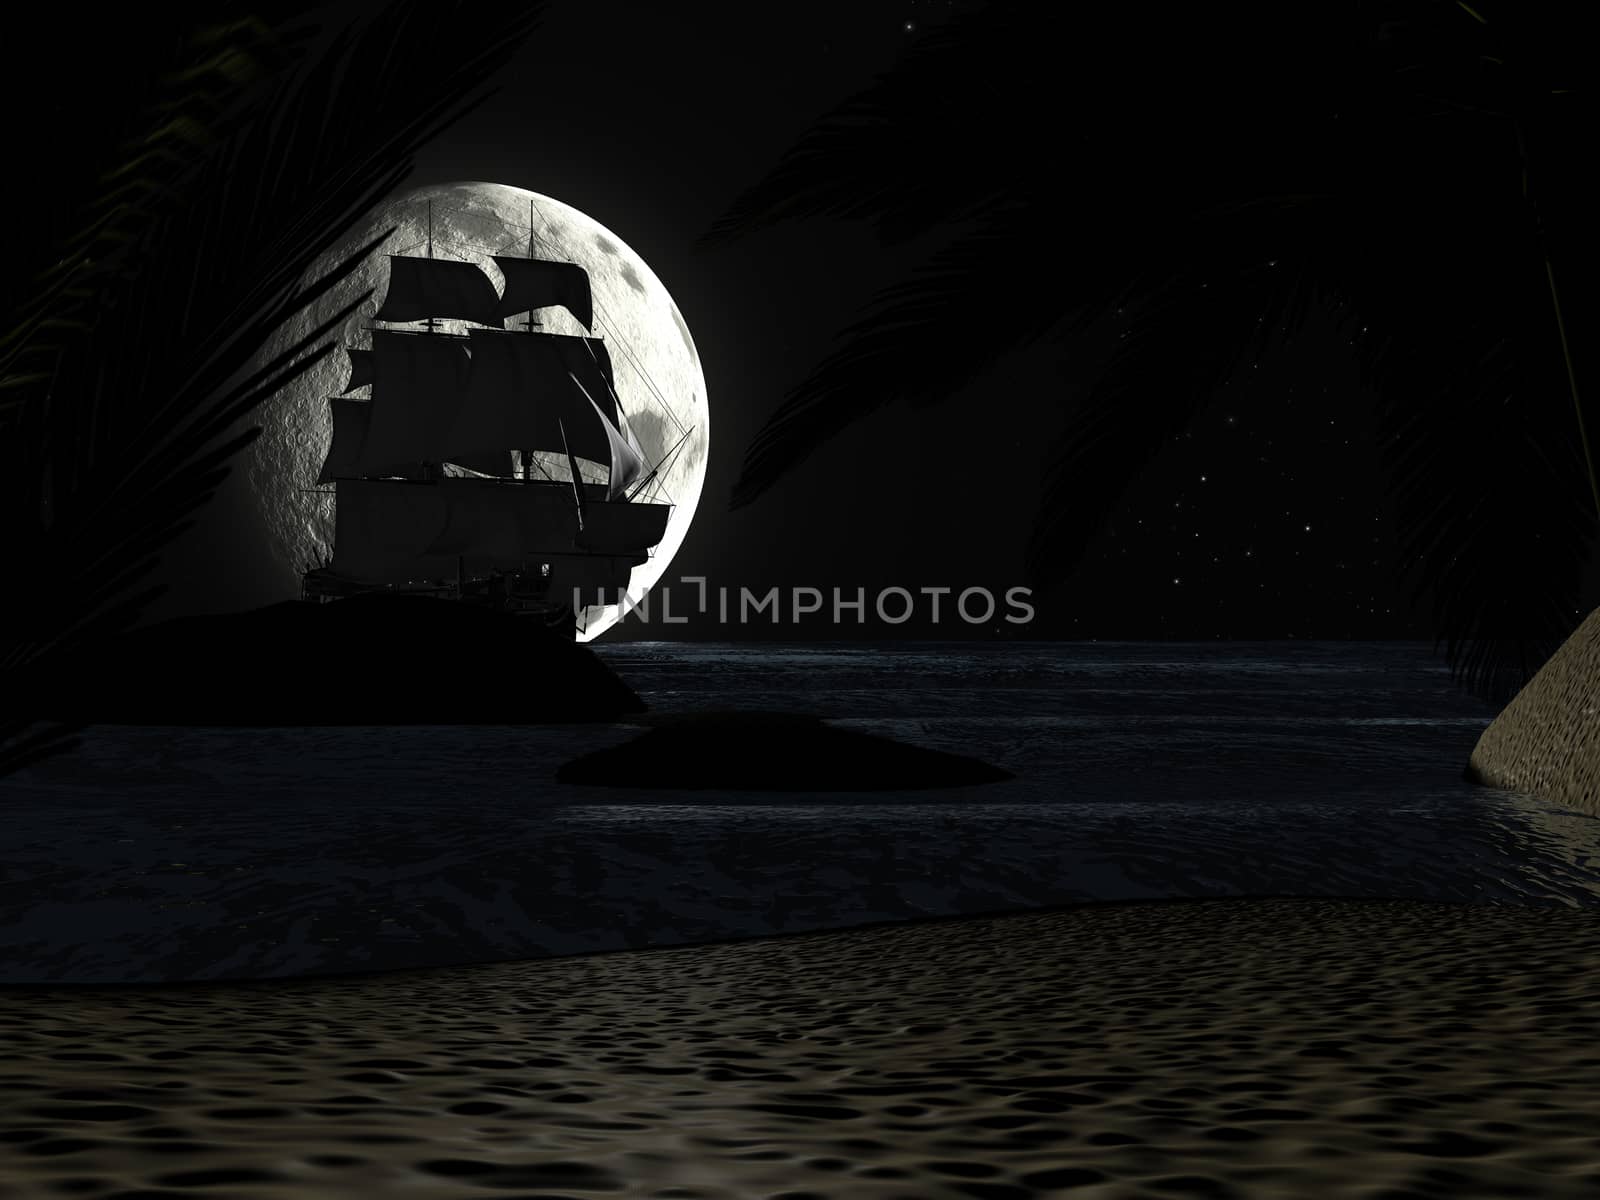 A tropical beach at night moonlight under starry sky, with palm trees and a sailboat